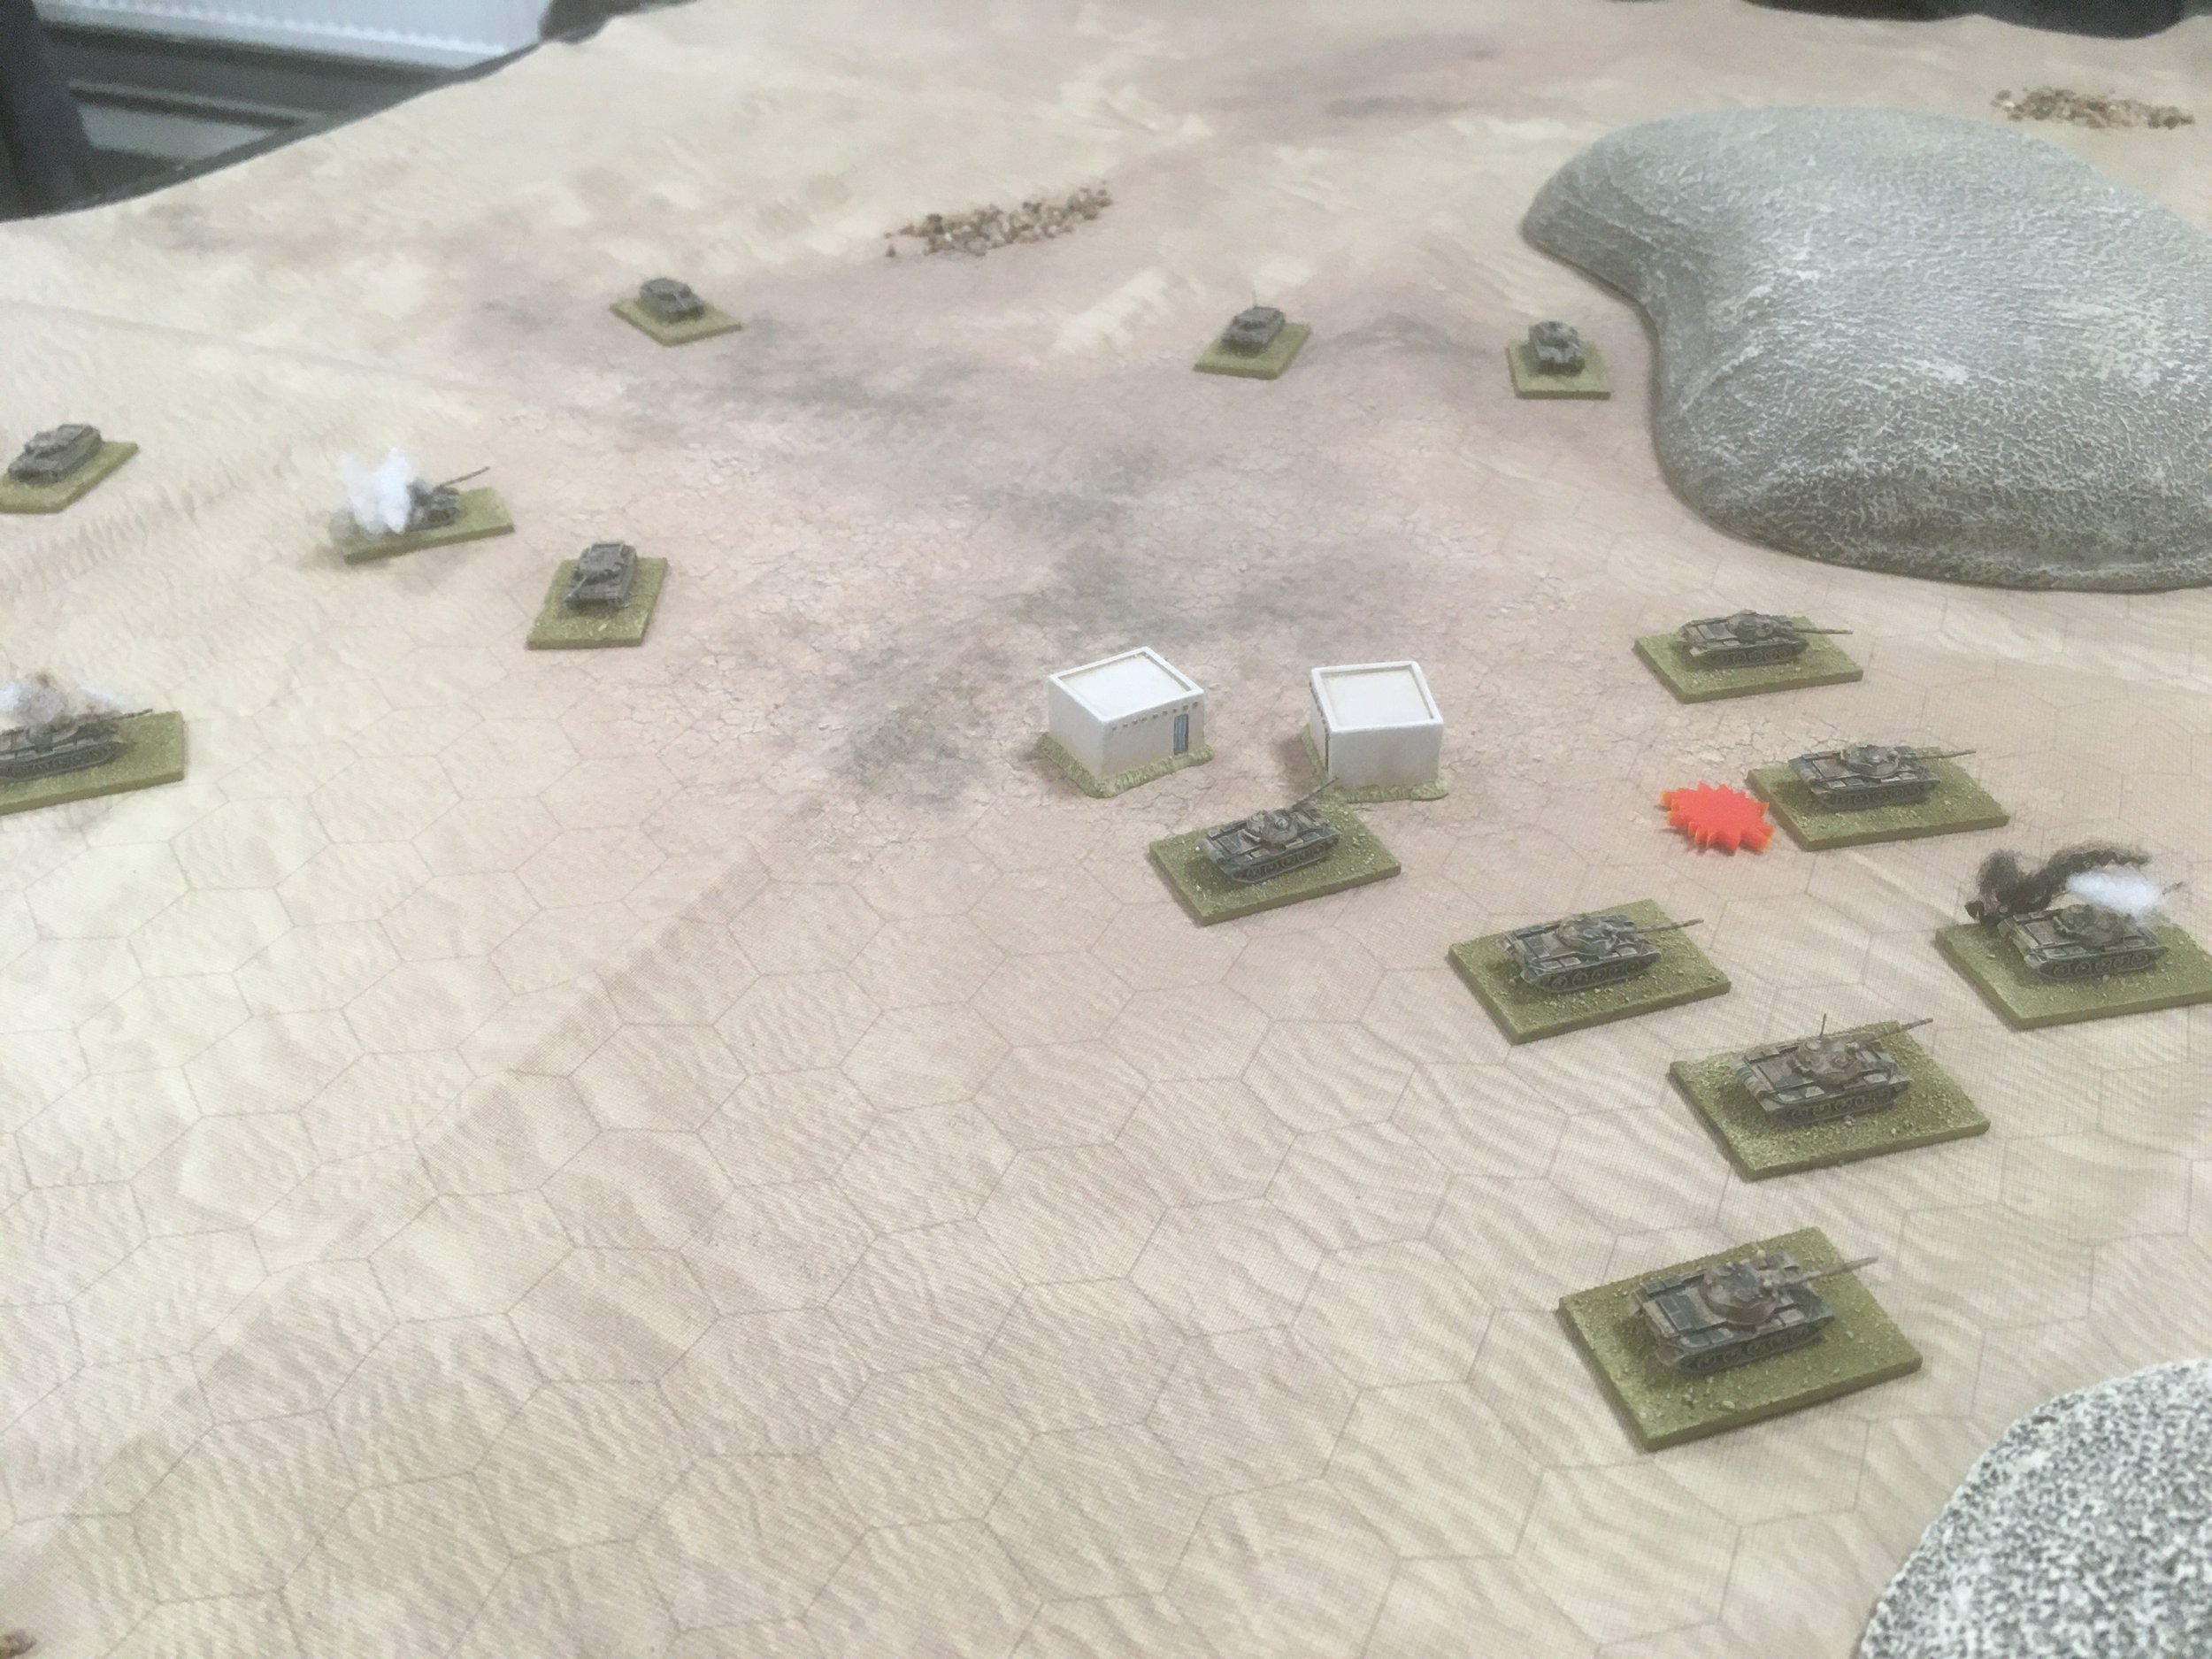 And with the screening platoon now all destroyed the flanks of the second and third T-62 platoons were dangerously exposed.